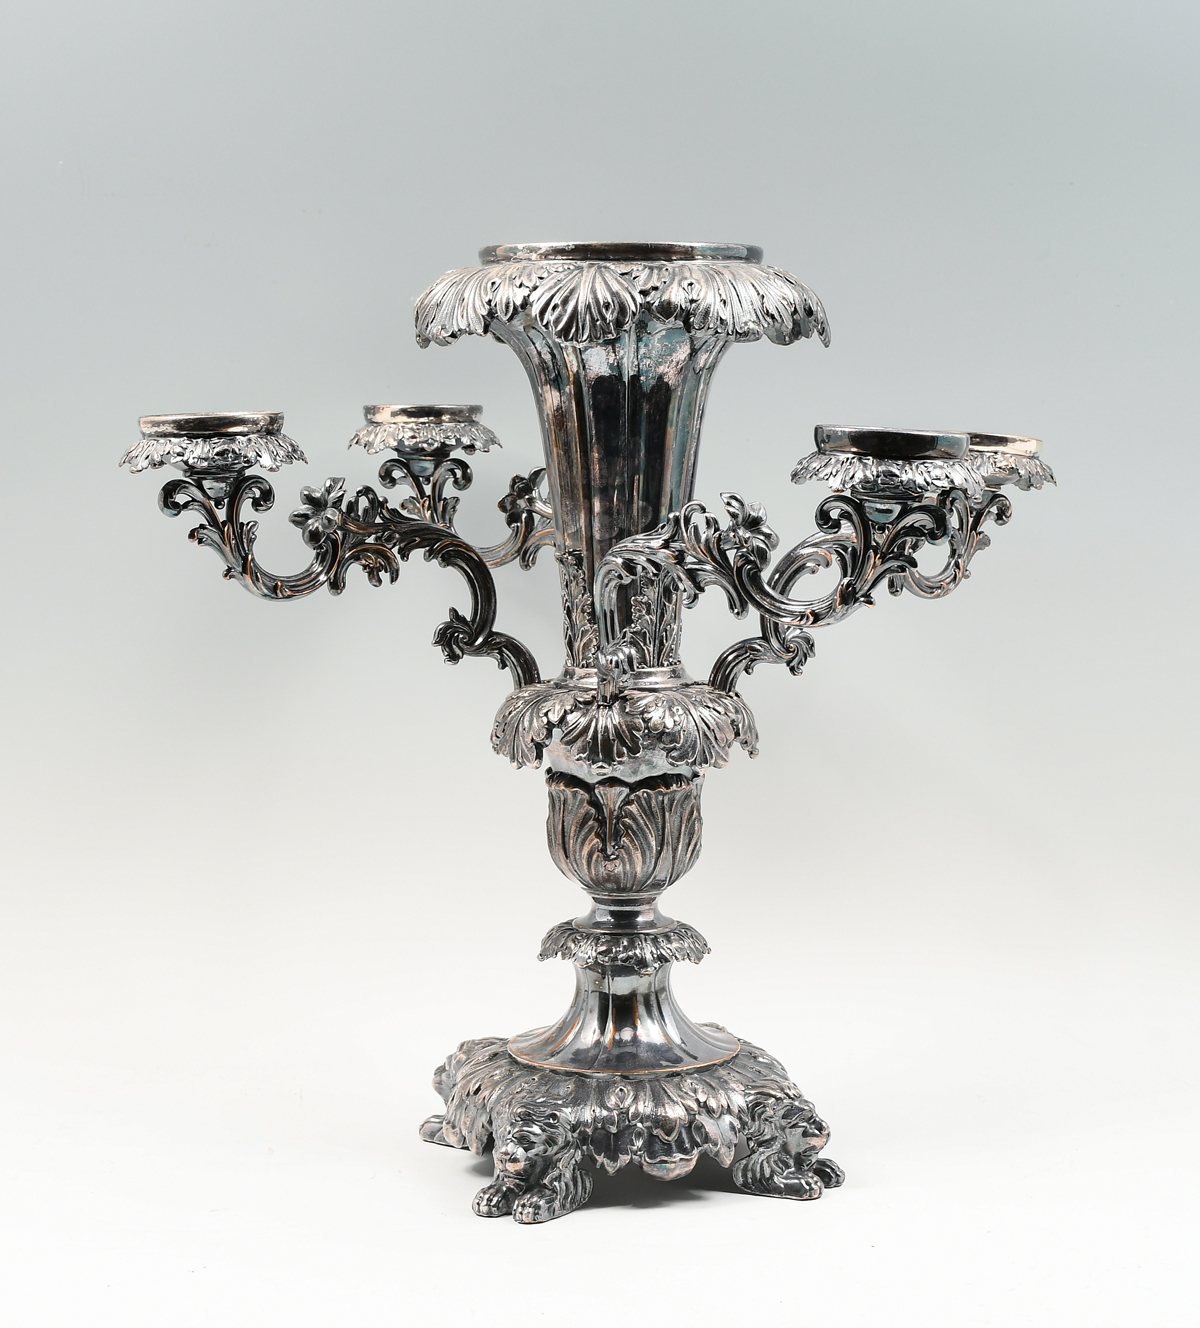 HIGHLY ORNATE SLVERPLATED EPERGNE  36a45f